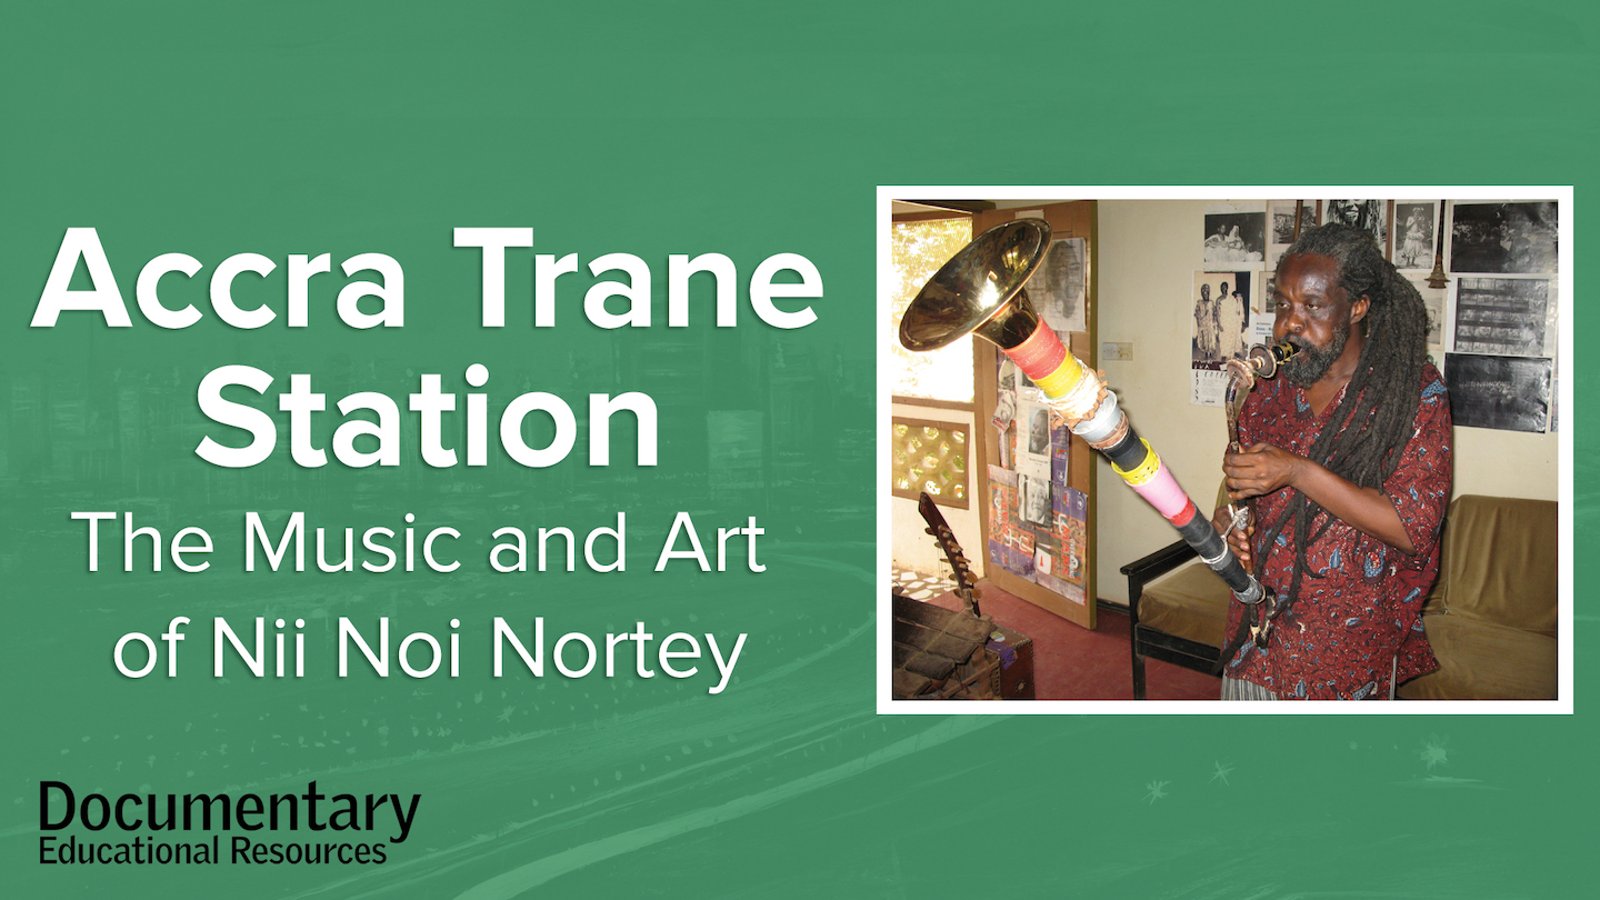 Accra Trane Station - The Music and Art of Nii Noi Nortey